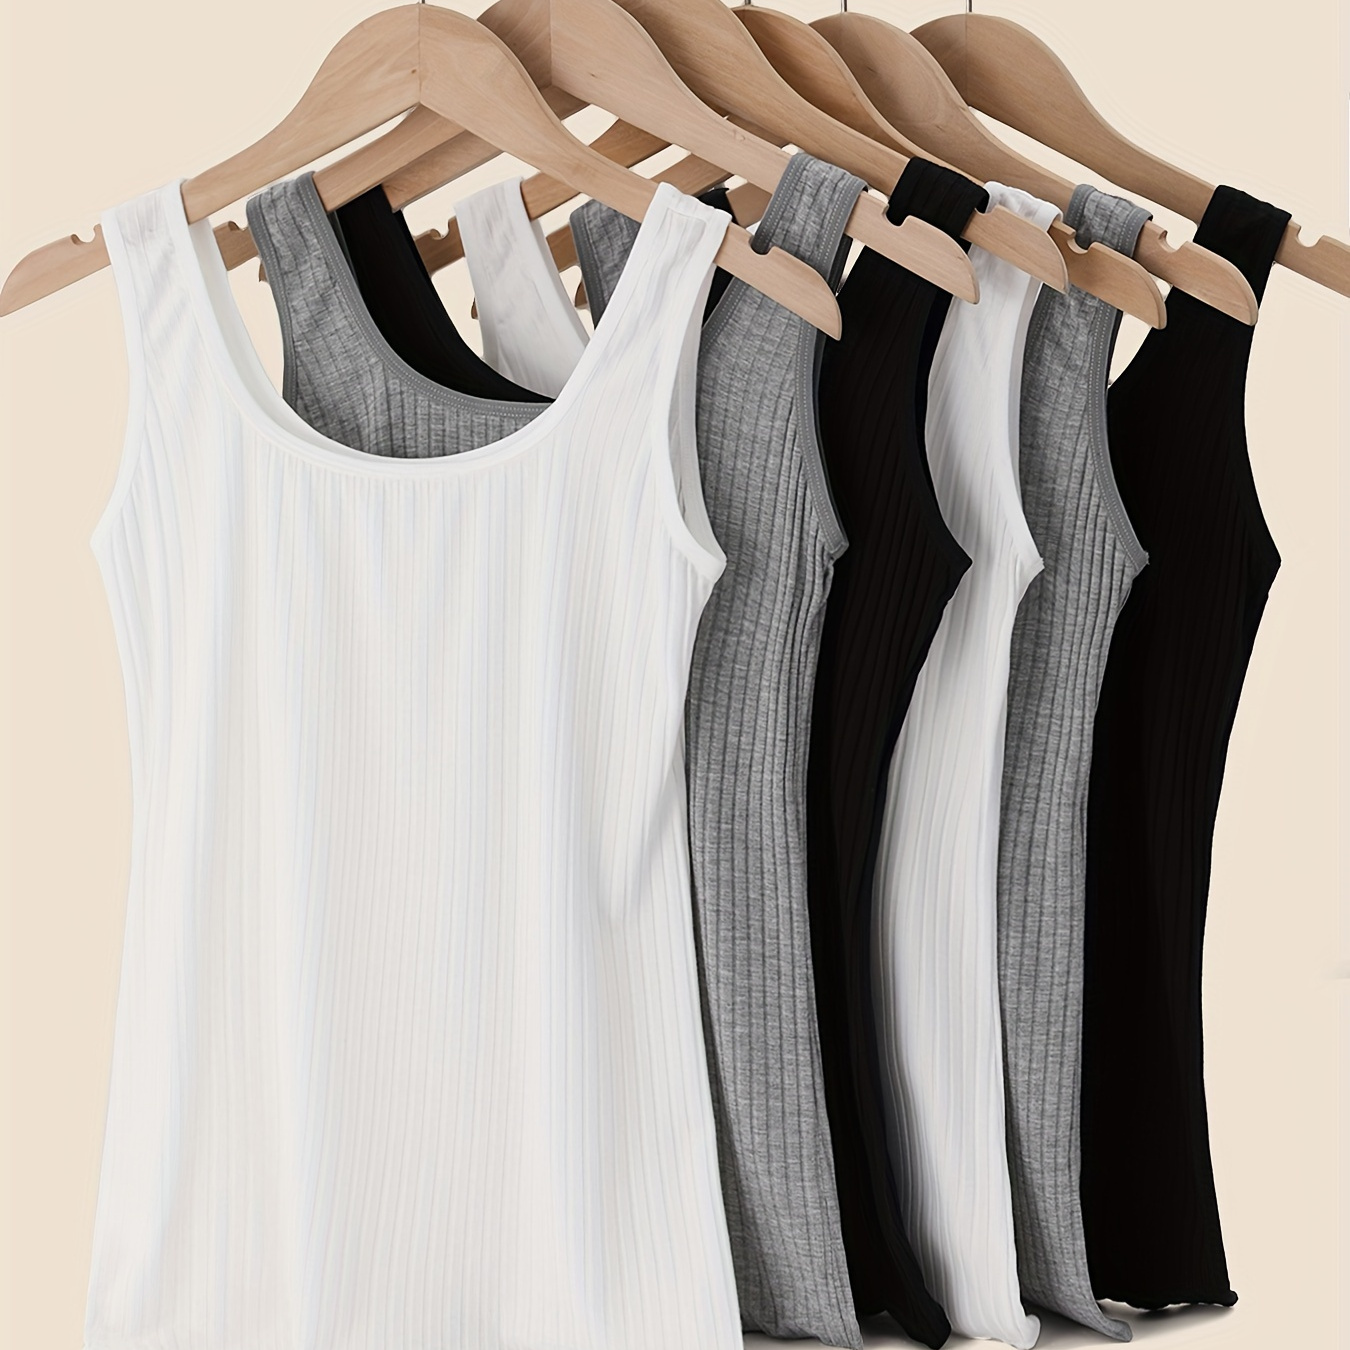 

6-pack Women's Cotton Ribbed Tank Tops In Black, White & Grey, Casual Style, Basic Sleeveless Shirts For Layering And Everyday Wear